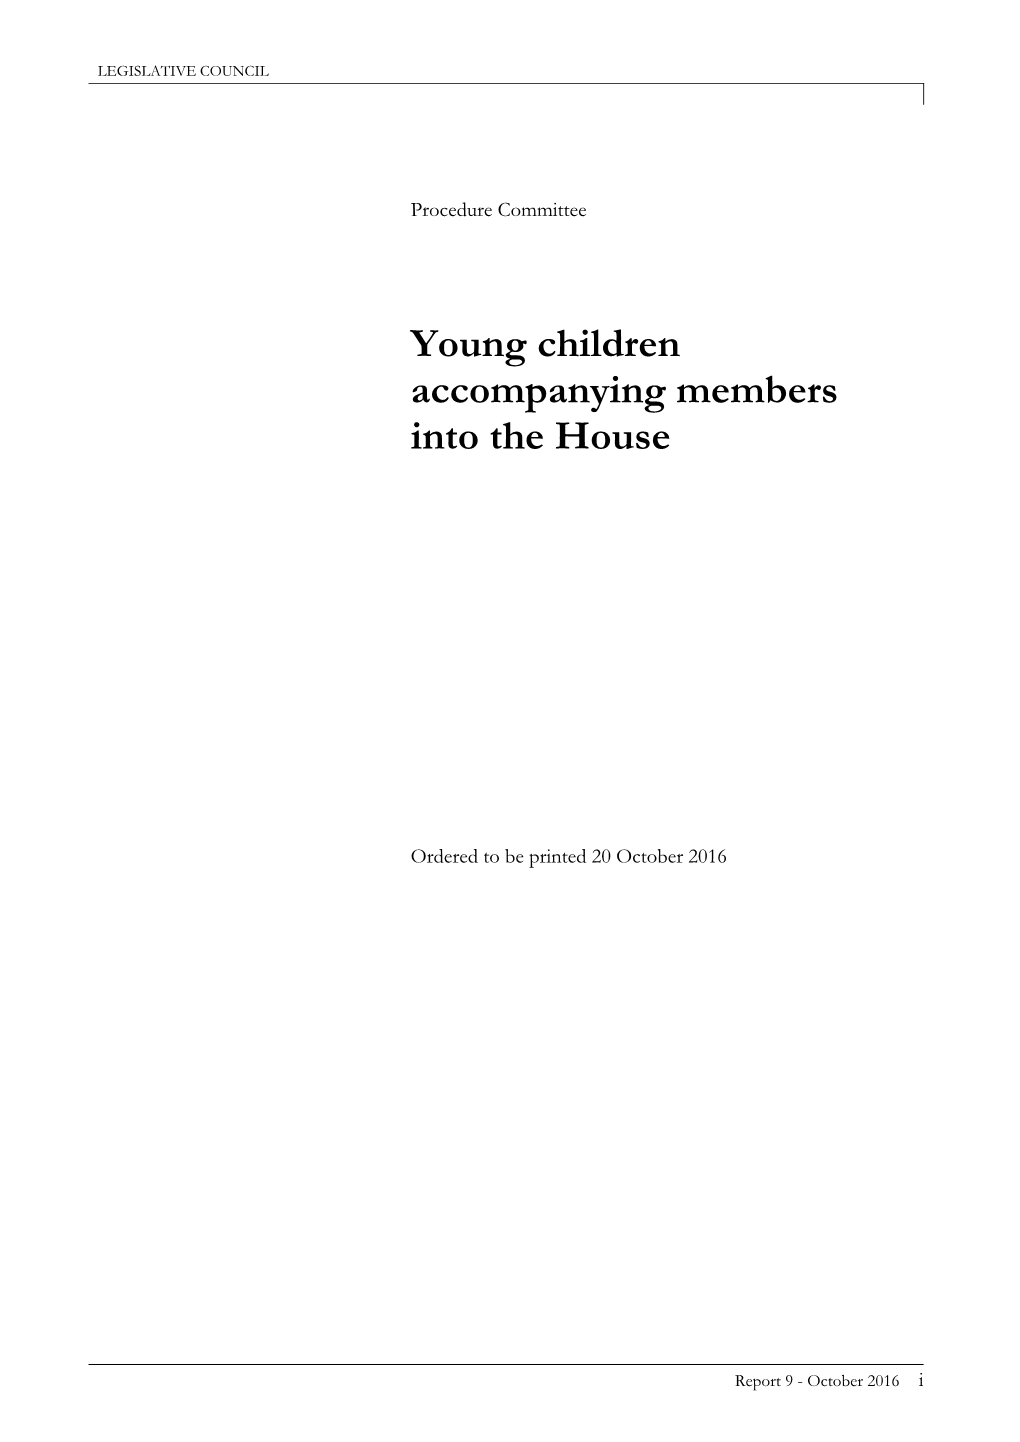 Report No. 9 Young Children Accompanying Members Into The